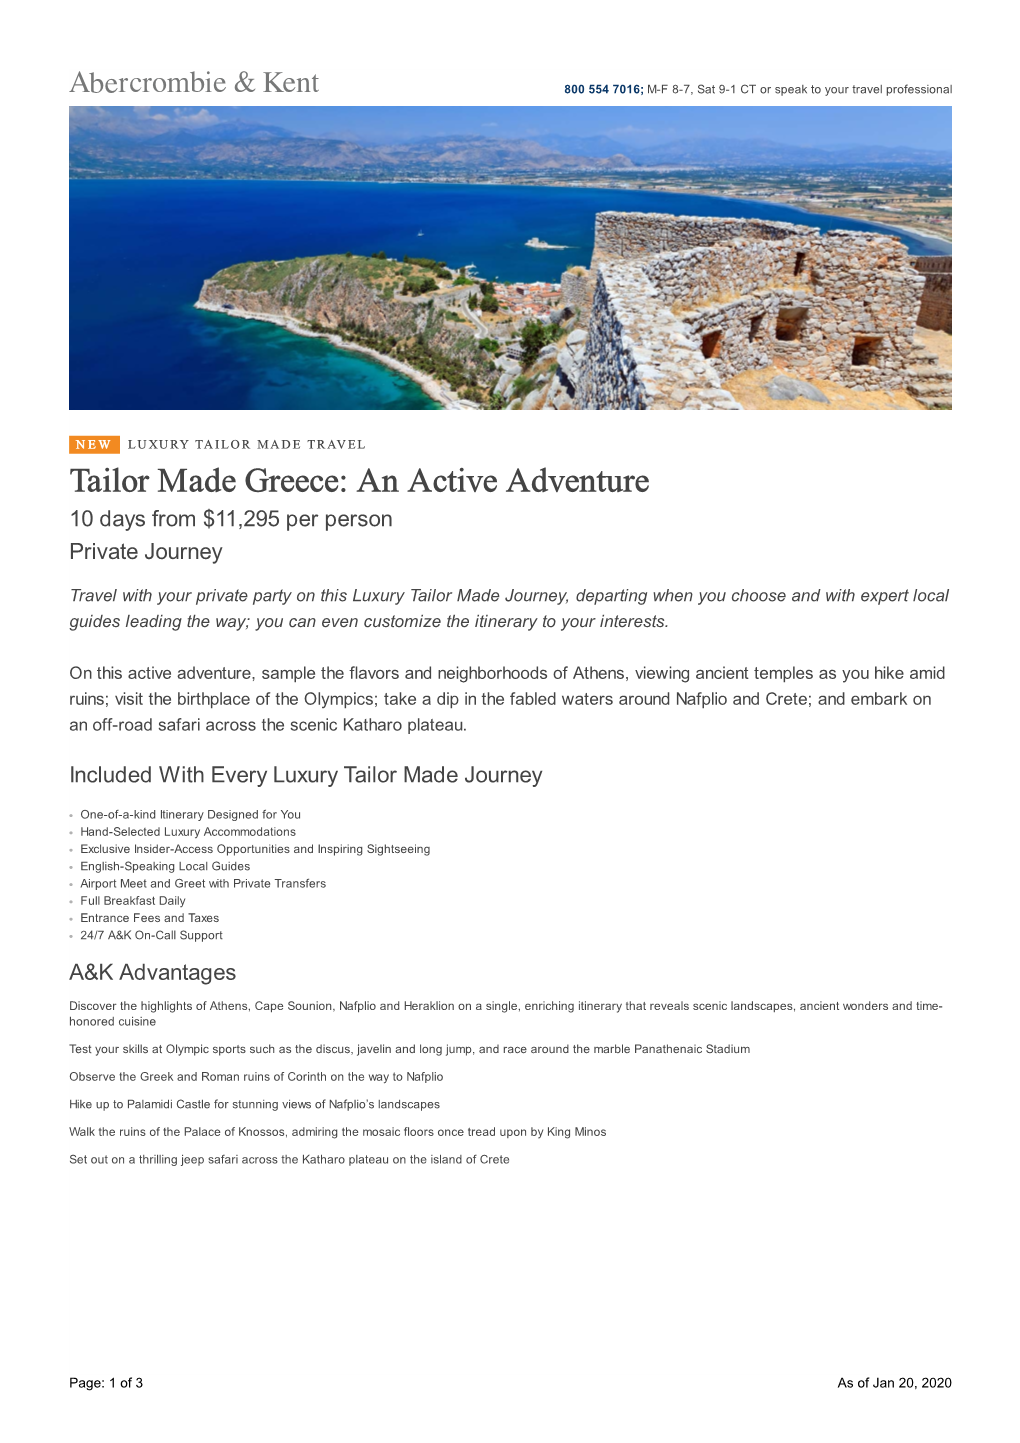 Tailor Made Greece: an Active Adventure 10 Days from $11,295 Per Person Private Journey